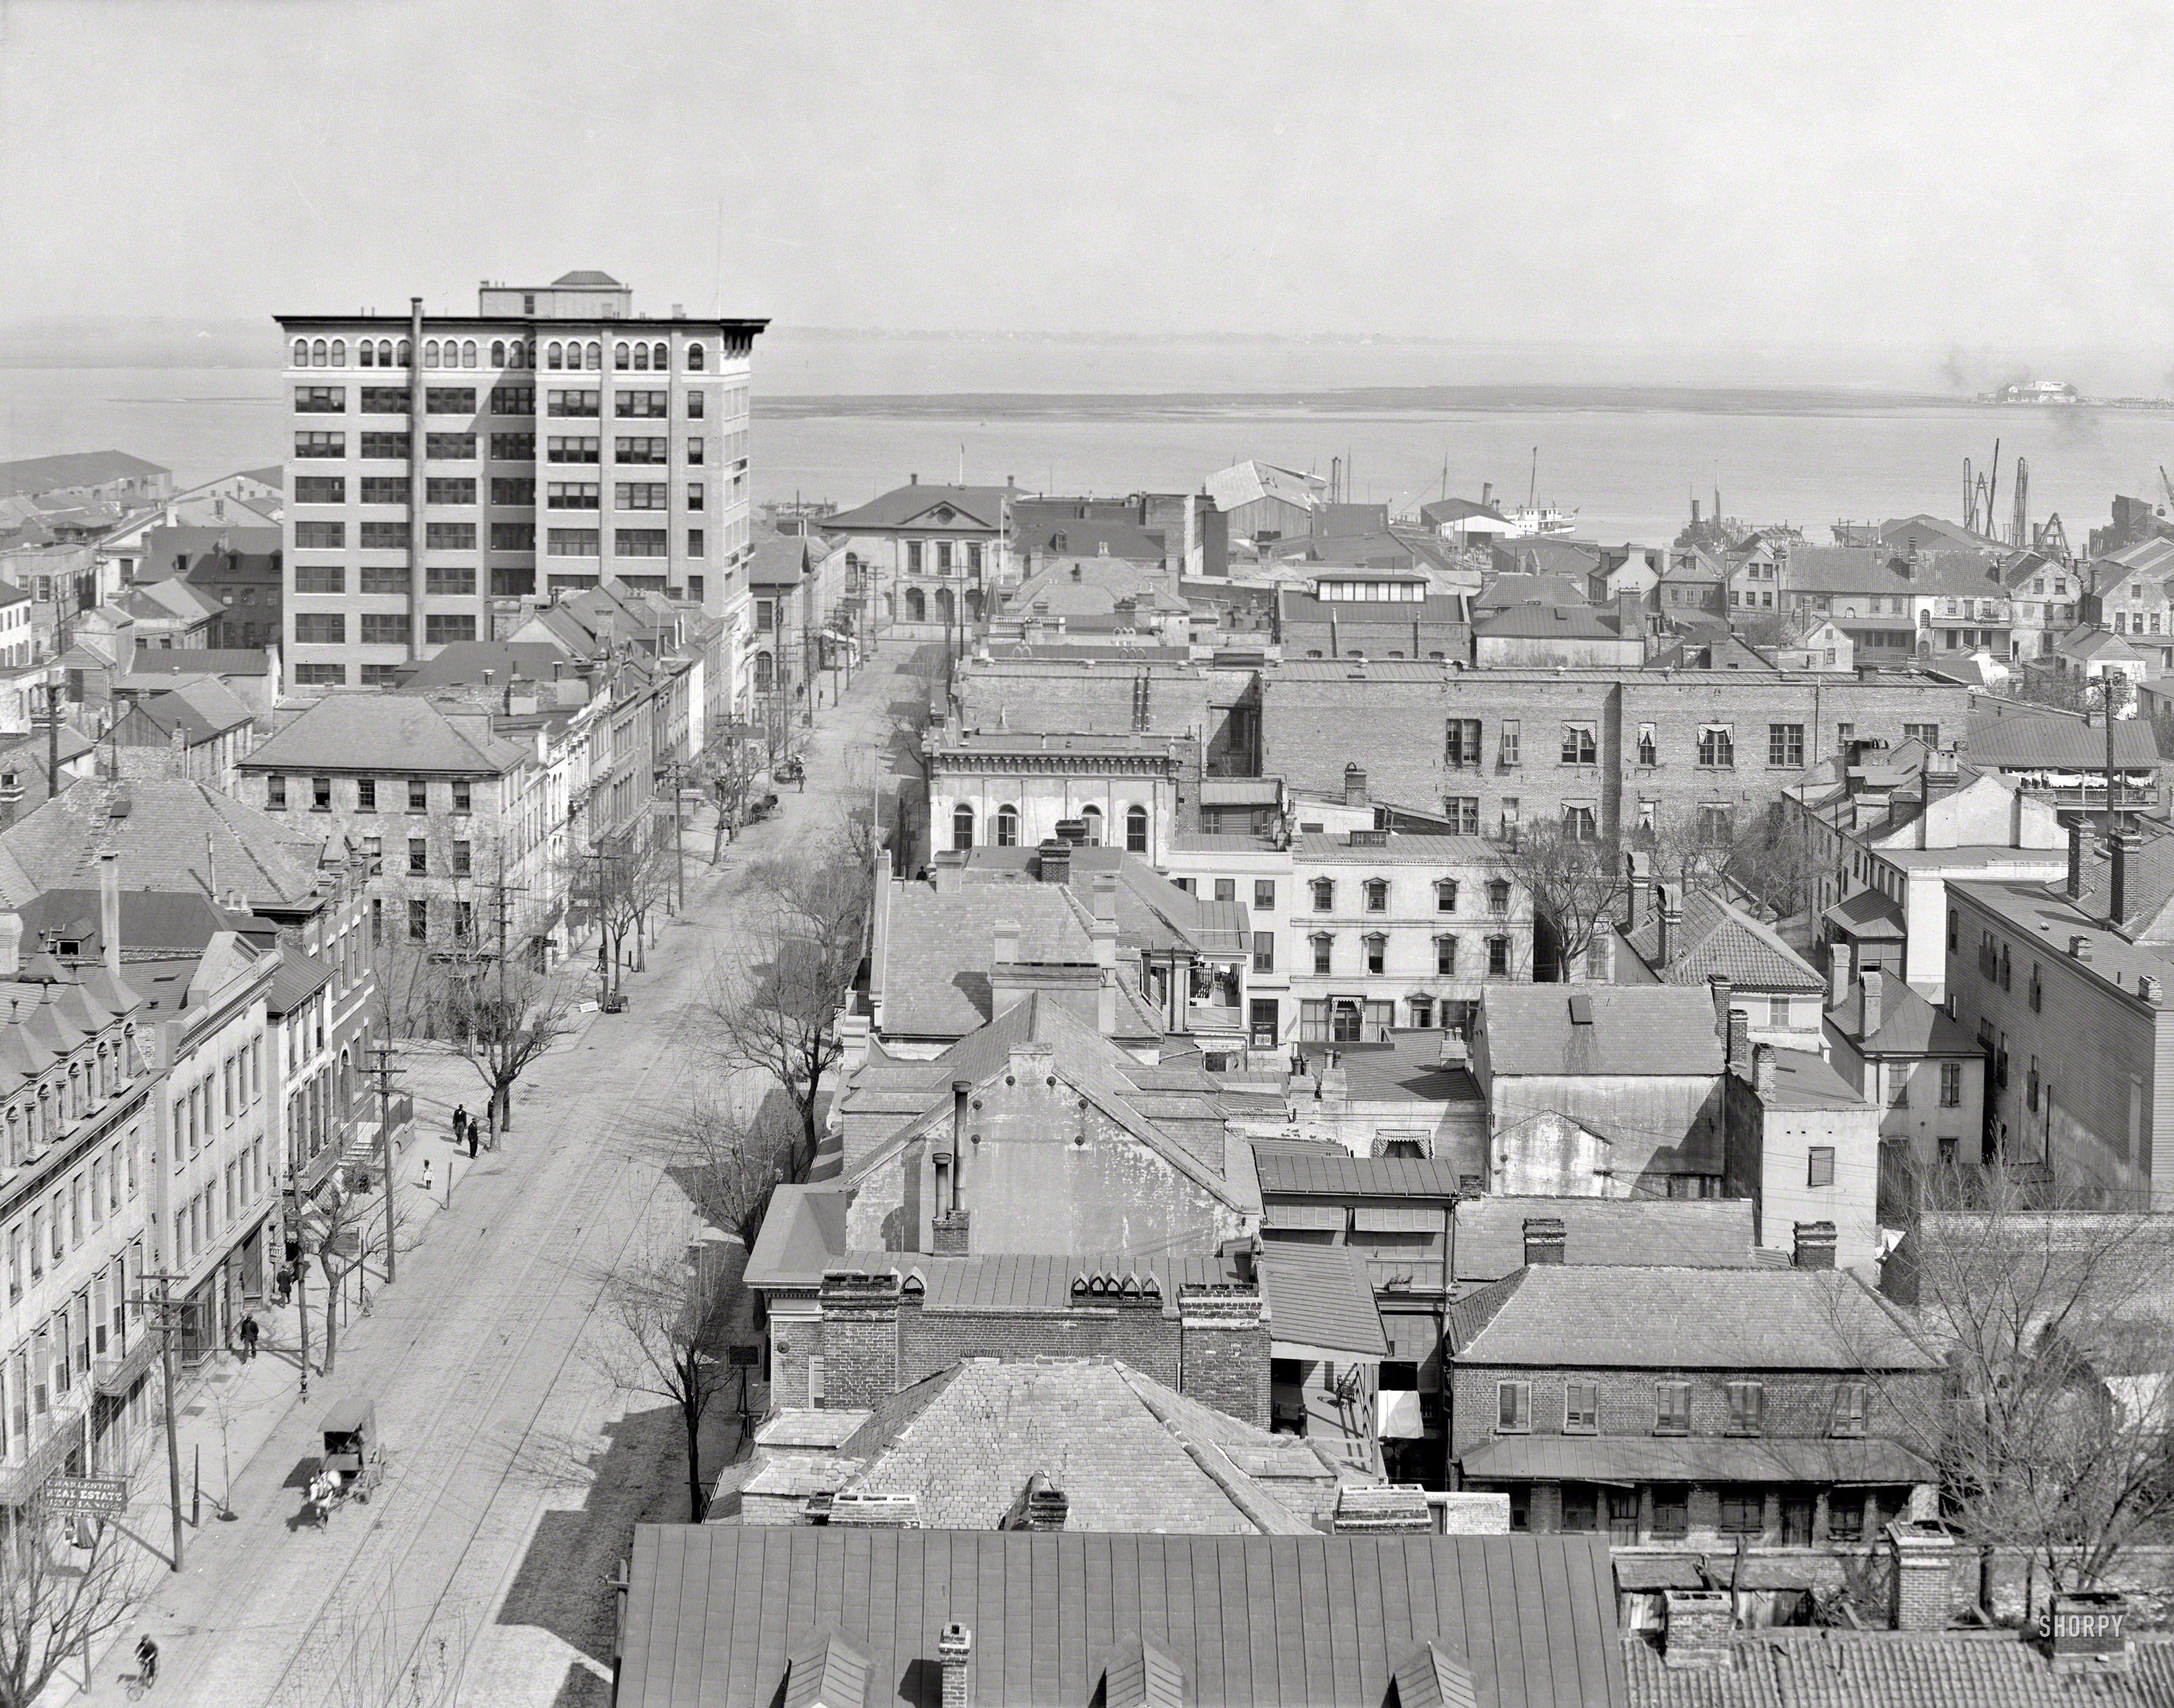 Charleston, South Carolina, circa 1911, with a waterfront rooftop view. 8x10 inch dry plate glass negative, Detroit Publishing Company. View full size.